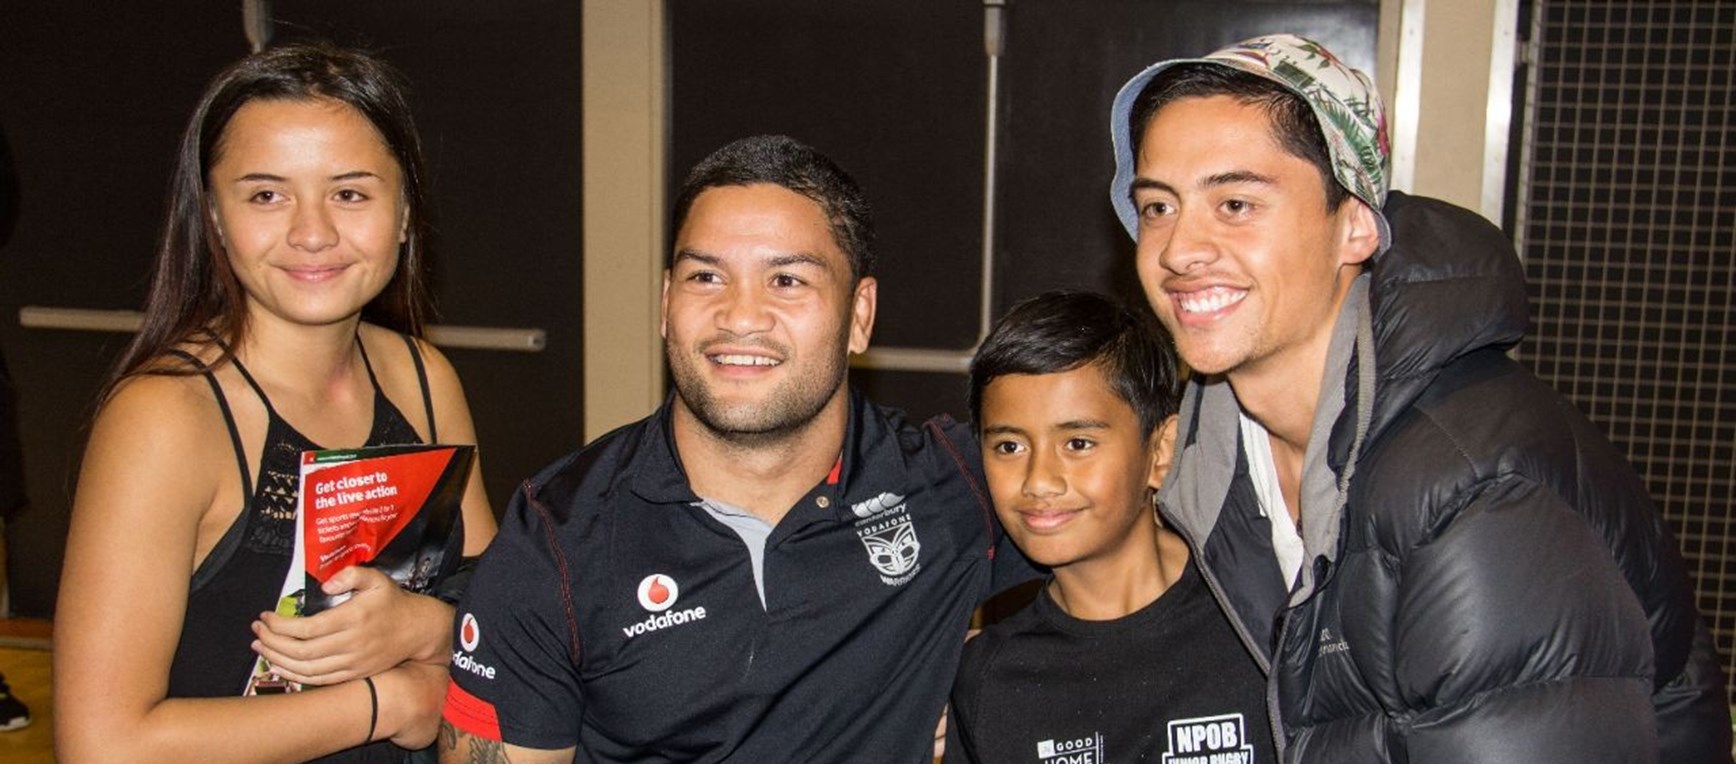 New Plymouth signing session in pictures